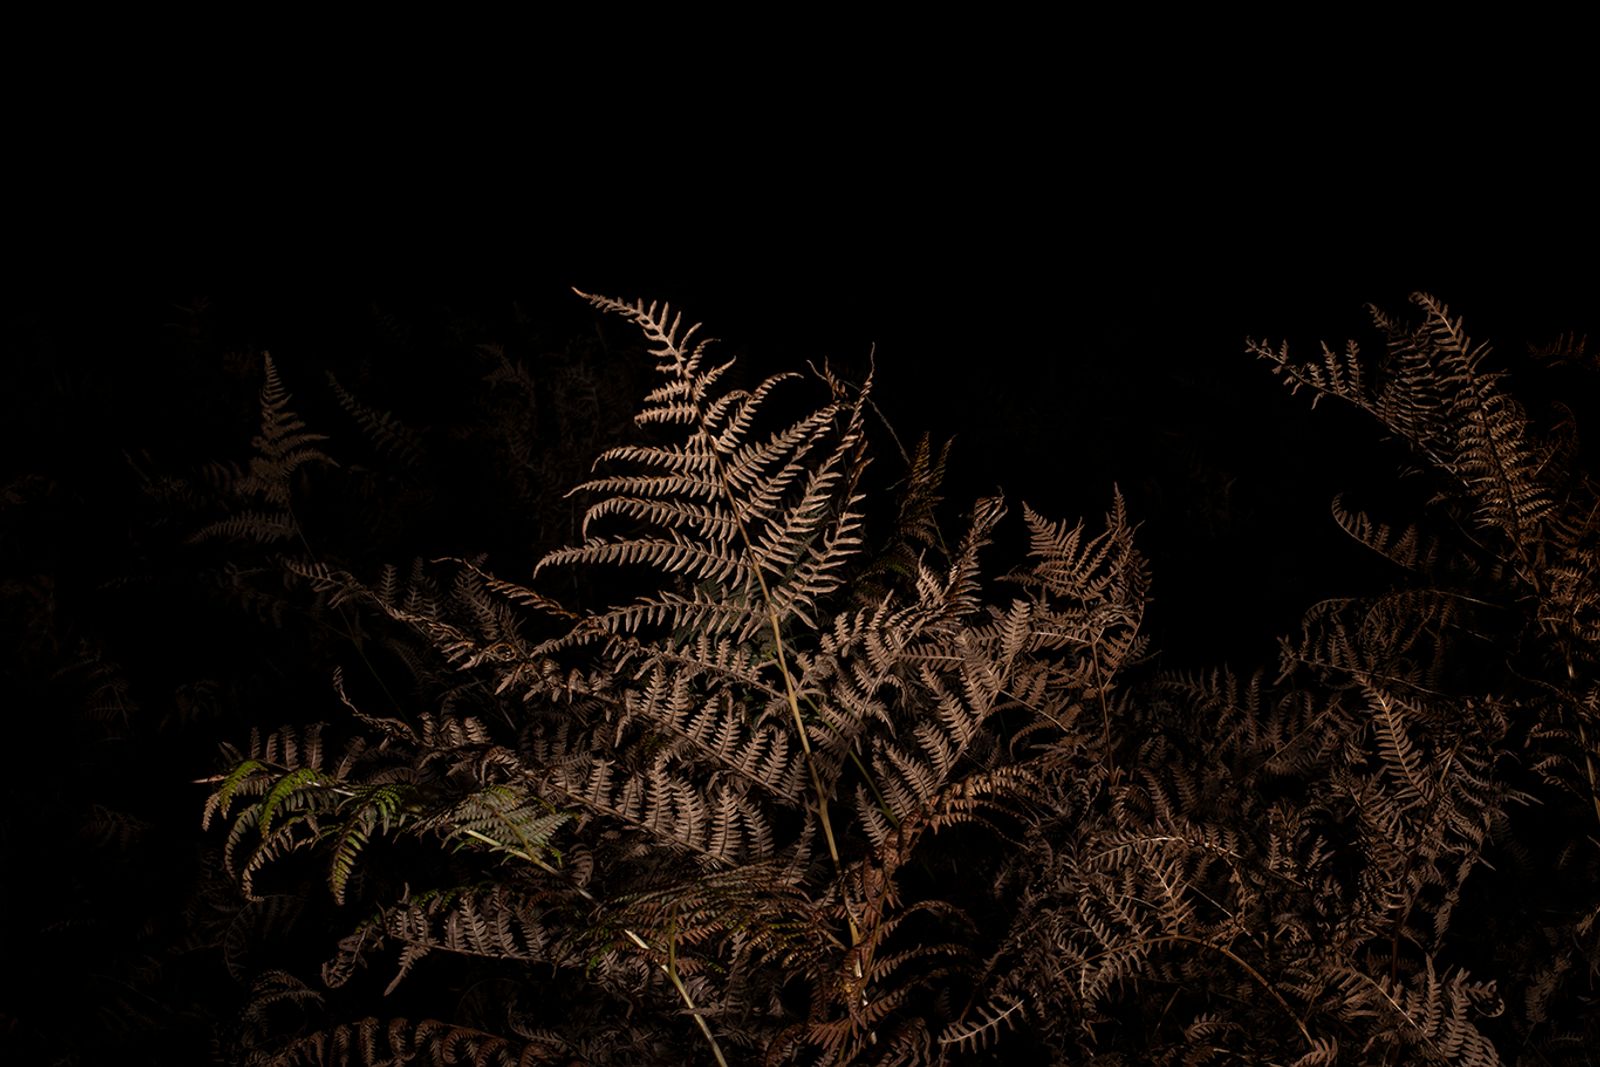 © Jamie House - Nothofagus pumilio, Goonhilly downs Cornwall UK, 00:46 21/11/21 Azmuth Angle 50 E